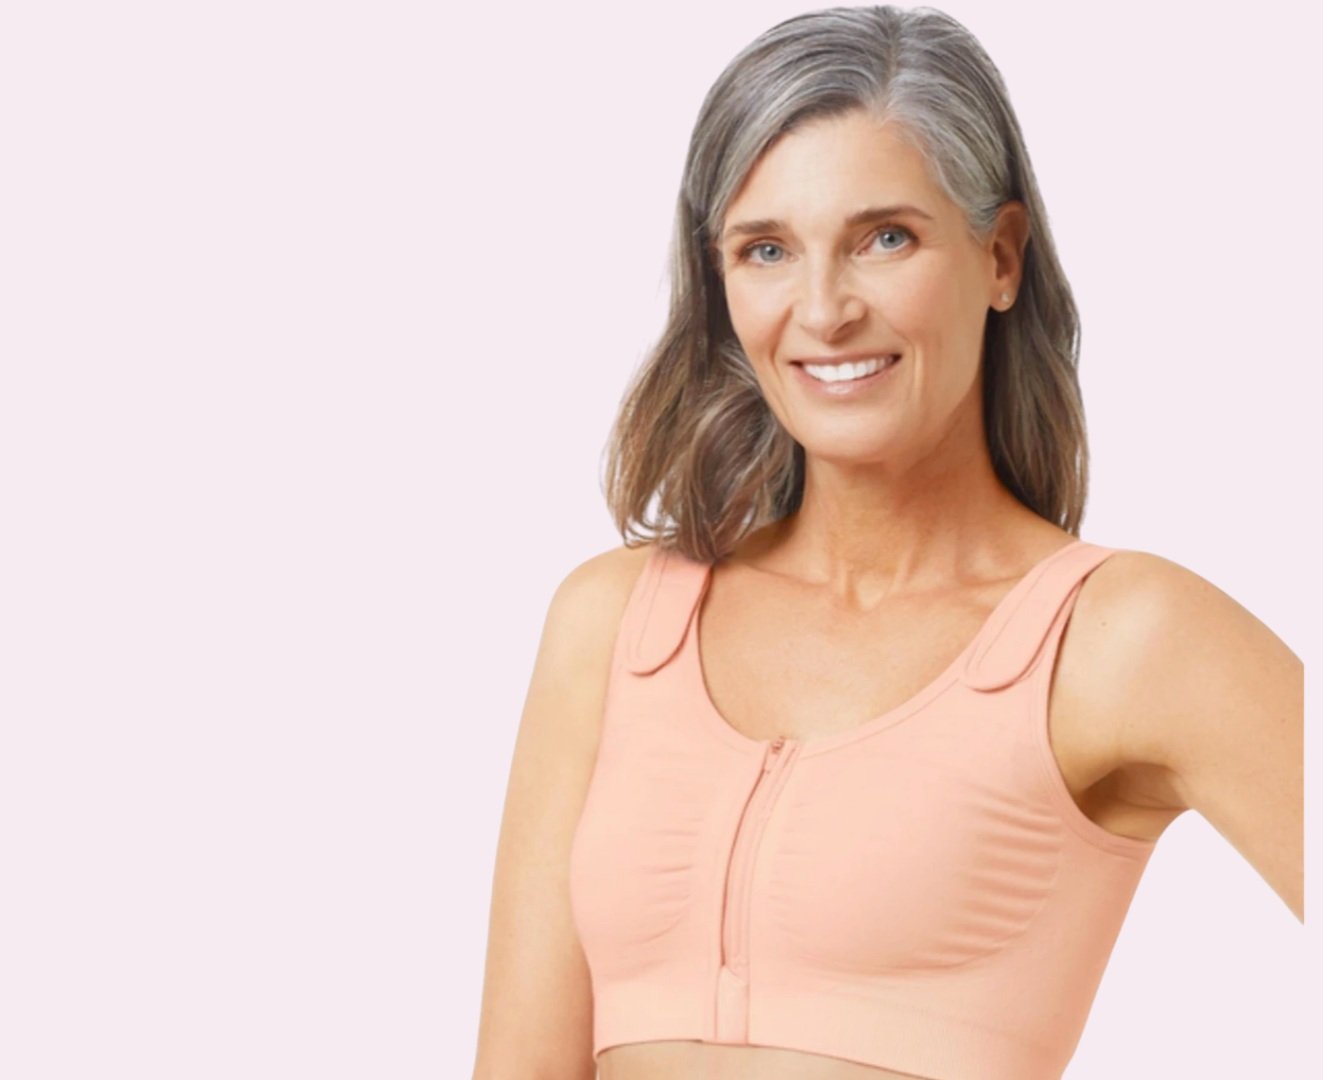 Learn about Shopping for Bras after Breast Reconstruction with